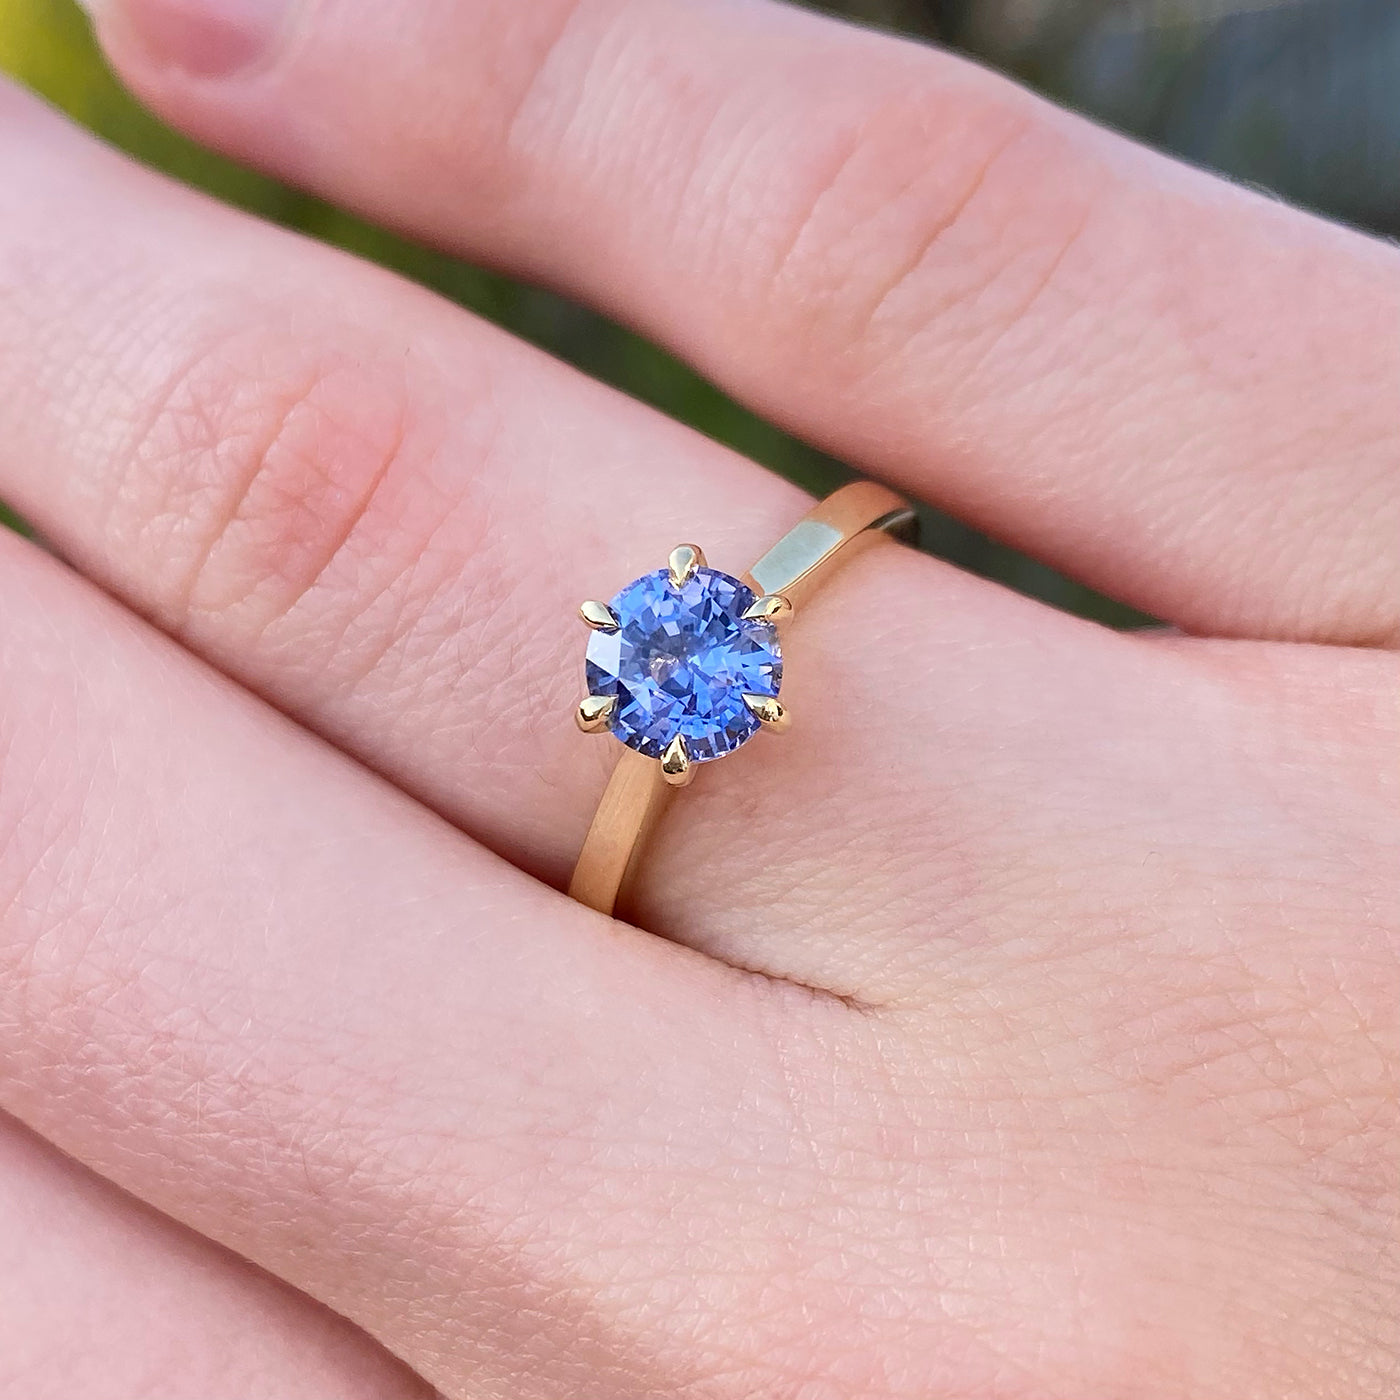 Periwinkle Blue Sapphire Solitaire Engagement Ring (Size L, Resize J – N)